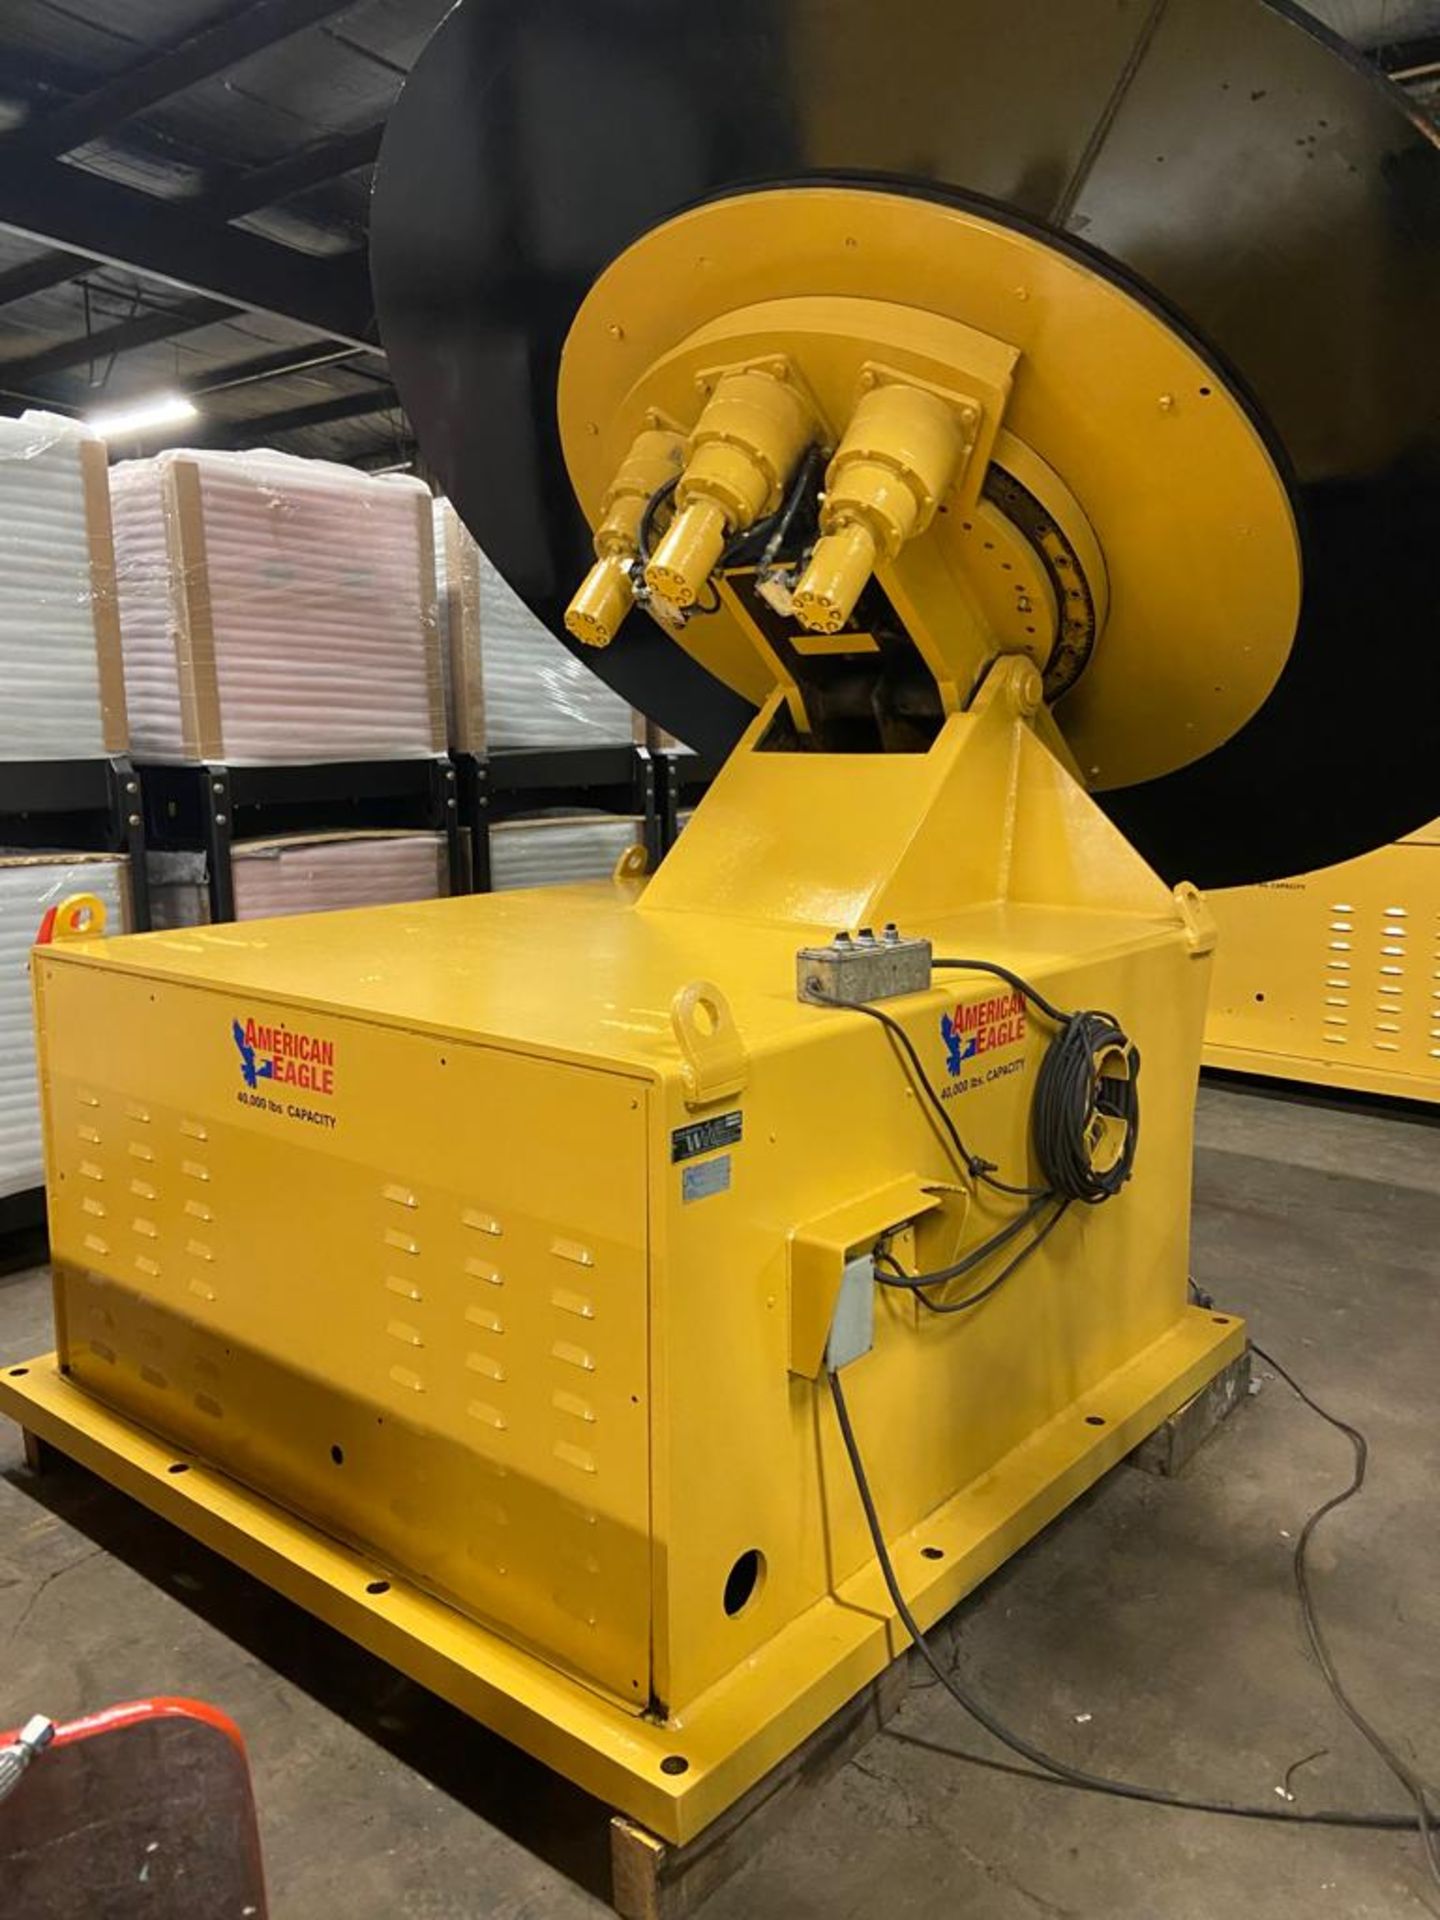 American Eagle WELDING POSITIONER 40000lbs capacity - tilt and rotate with pendant controller unit -